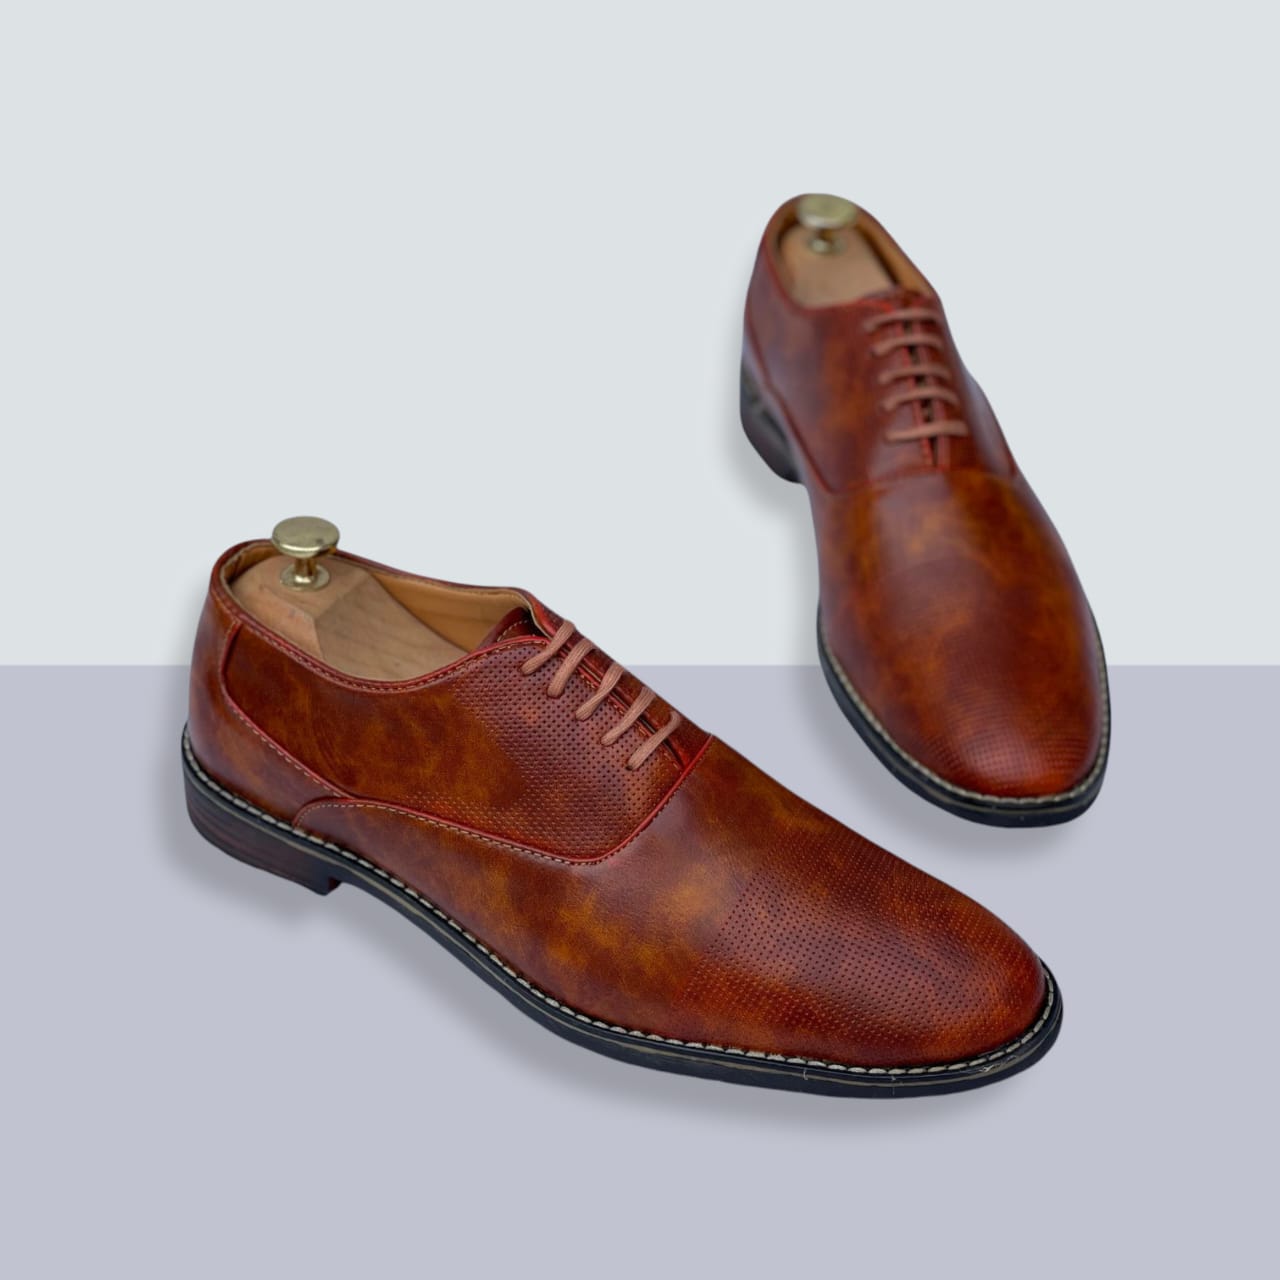 New Stylish Woven Shoes Formal Business And Casual Wear Men-Jackmarc